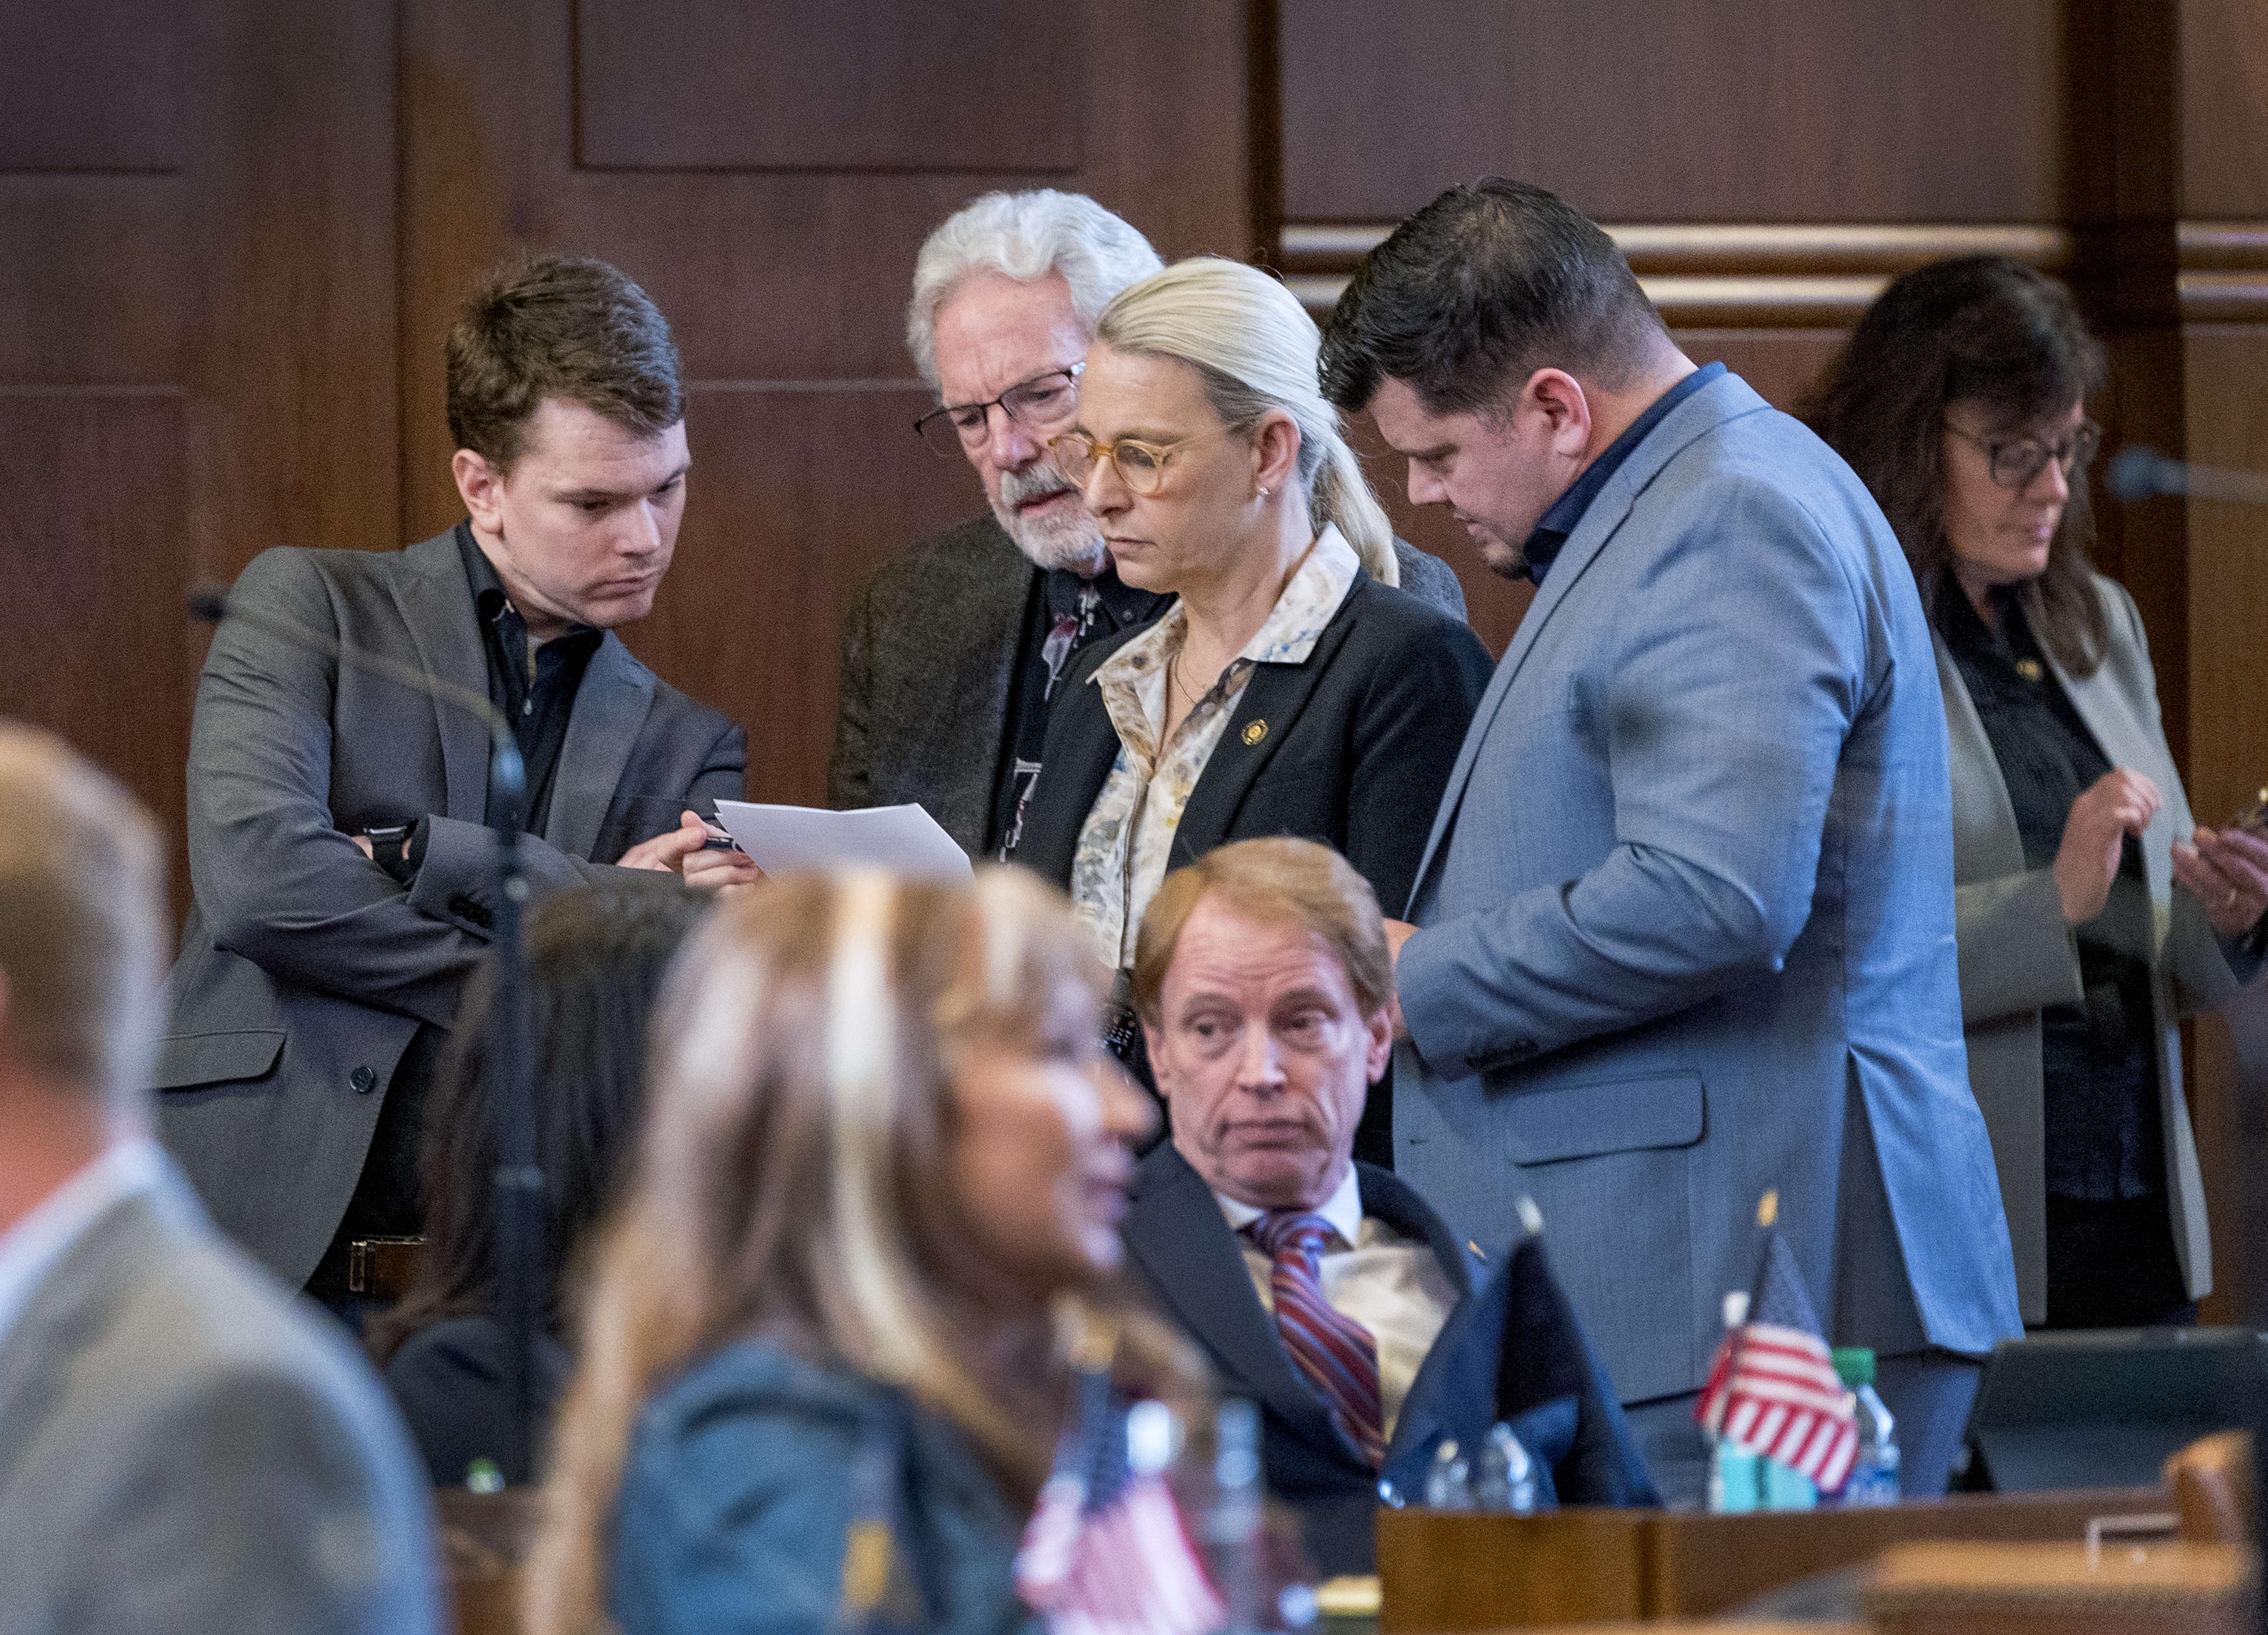 Members of the Oregon Senate talk on the Senate floor Friday at the Capitol in Salem, Ore. The Senate approved House Bill 4002, which passed yesterday in the House. Sen. Kate Lieber (center, standing) a Democrat from Portland, was one of the architects of the bill. Sen. Tim Knopp (seated in front of Lieber), a Republican from Bend and the Minority Leader, said the bipartisan bill was a response to the will of Oregonians.